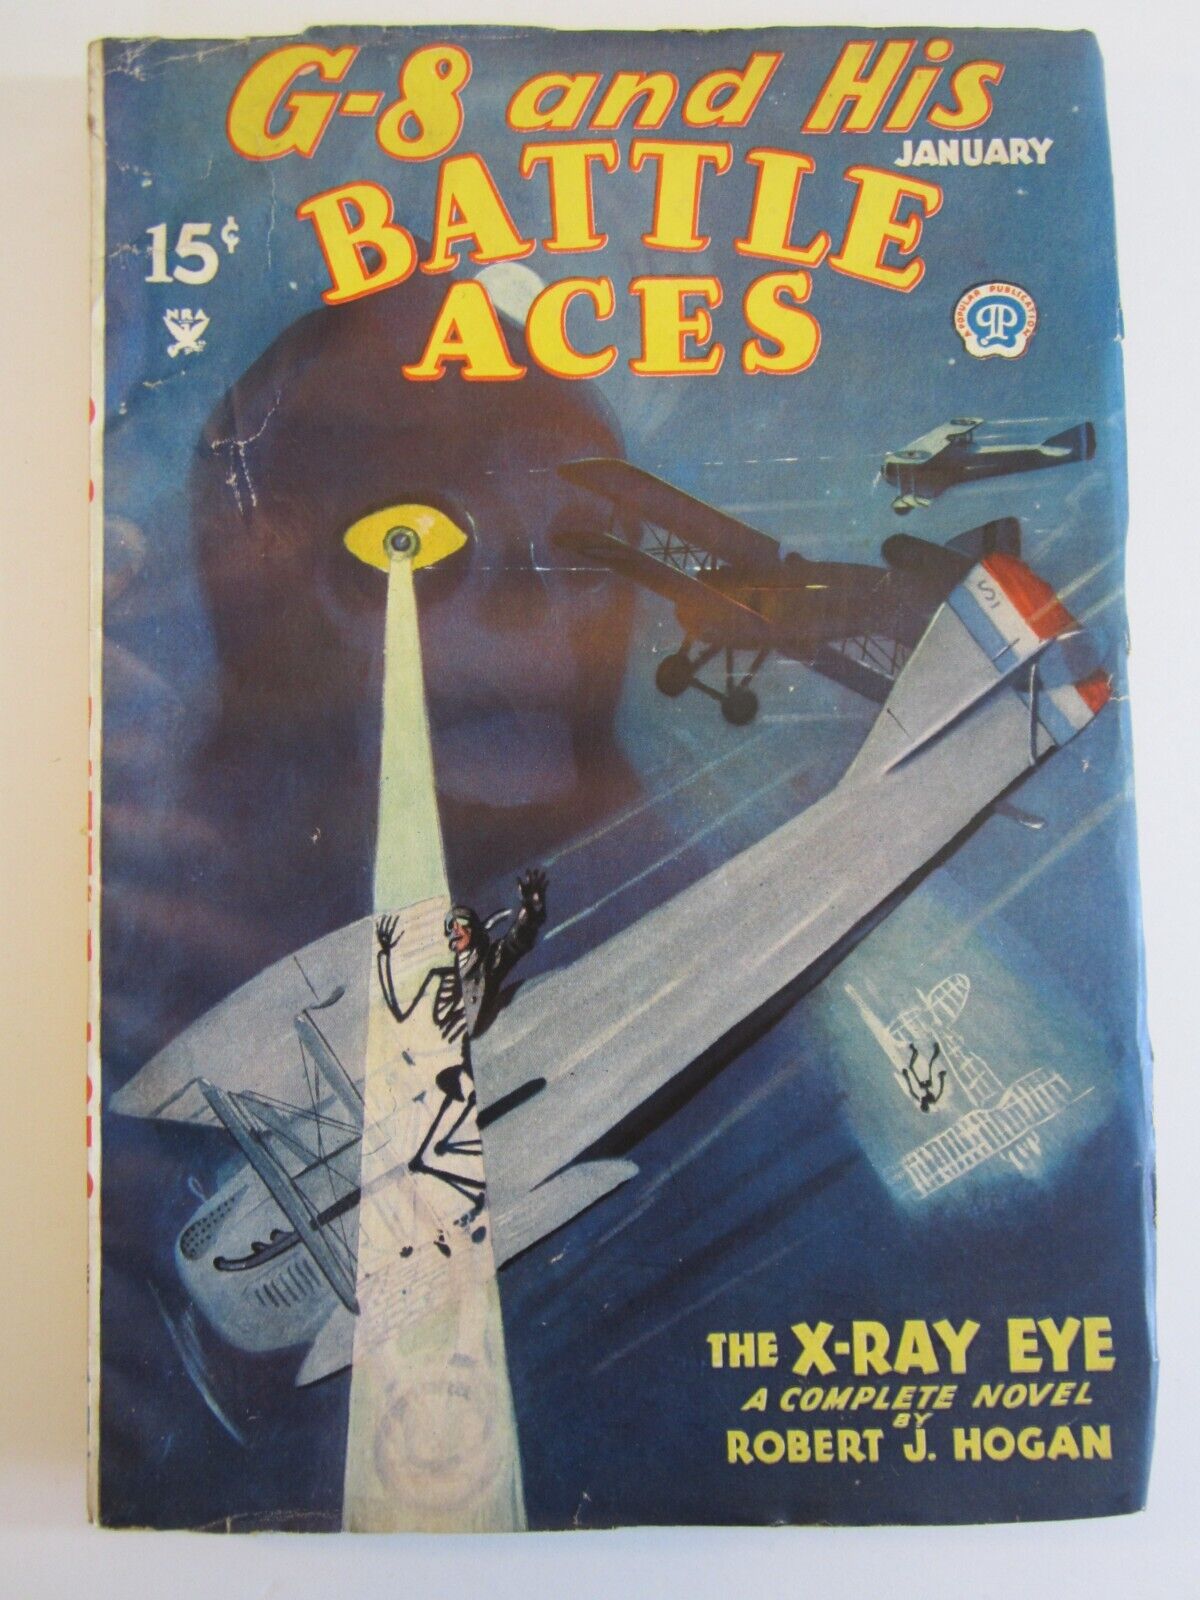 G-8 and His Battle Aces Jan. 1935 VG/FN Classic Blakeslee X-ray eye skull cover